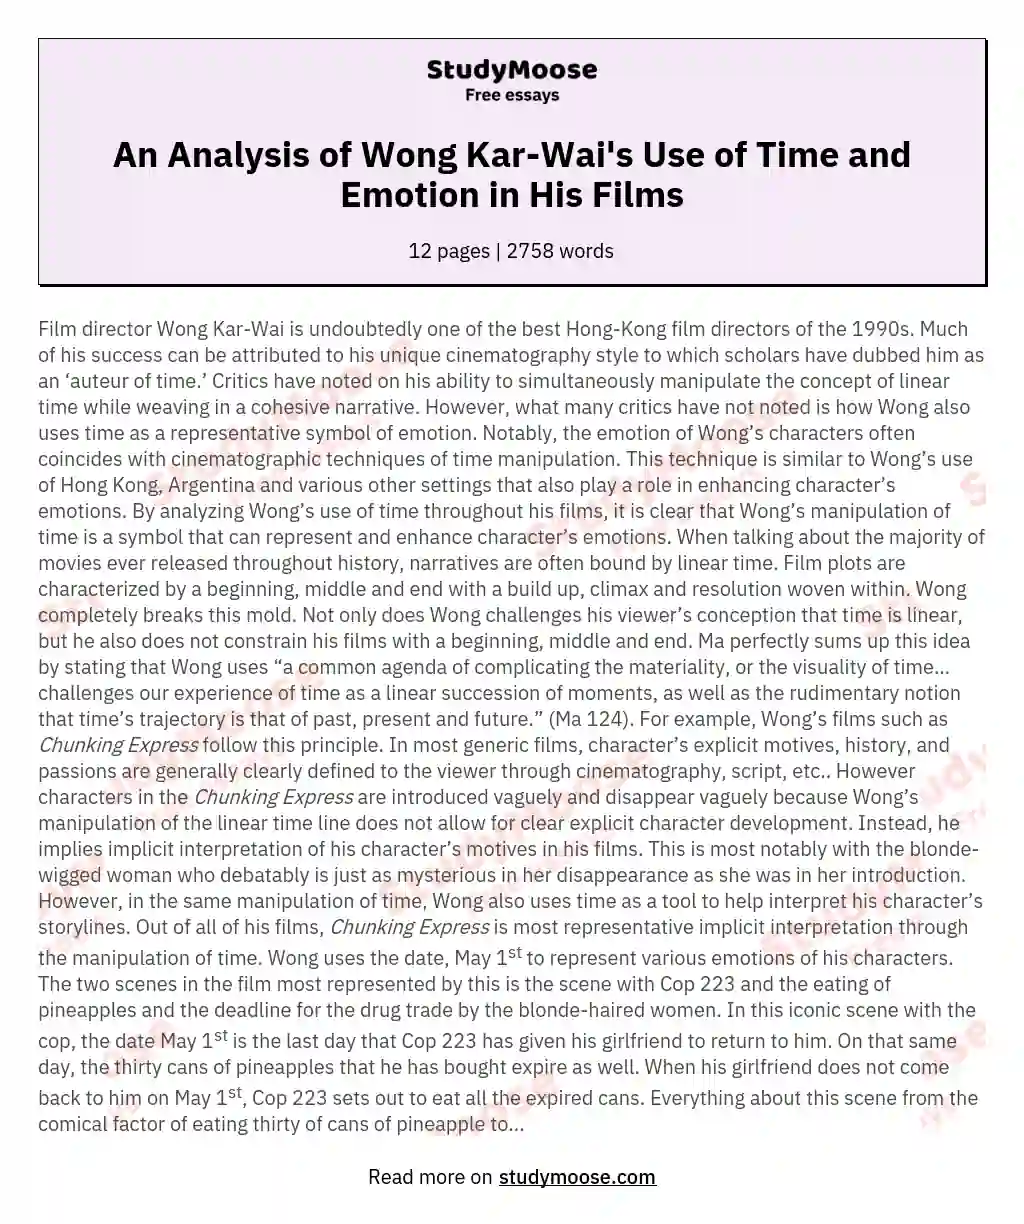 An Analysis of Wong Kar-Wai's Use of Time and Emotion in His Films